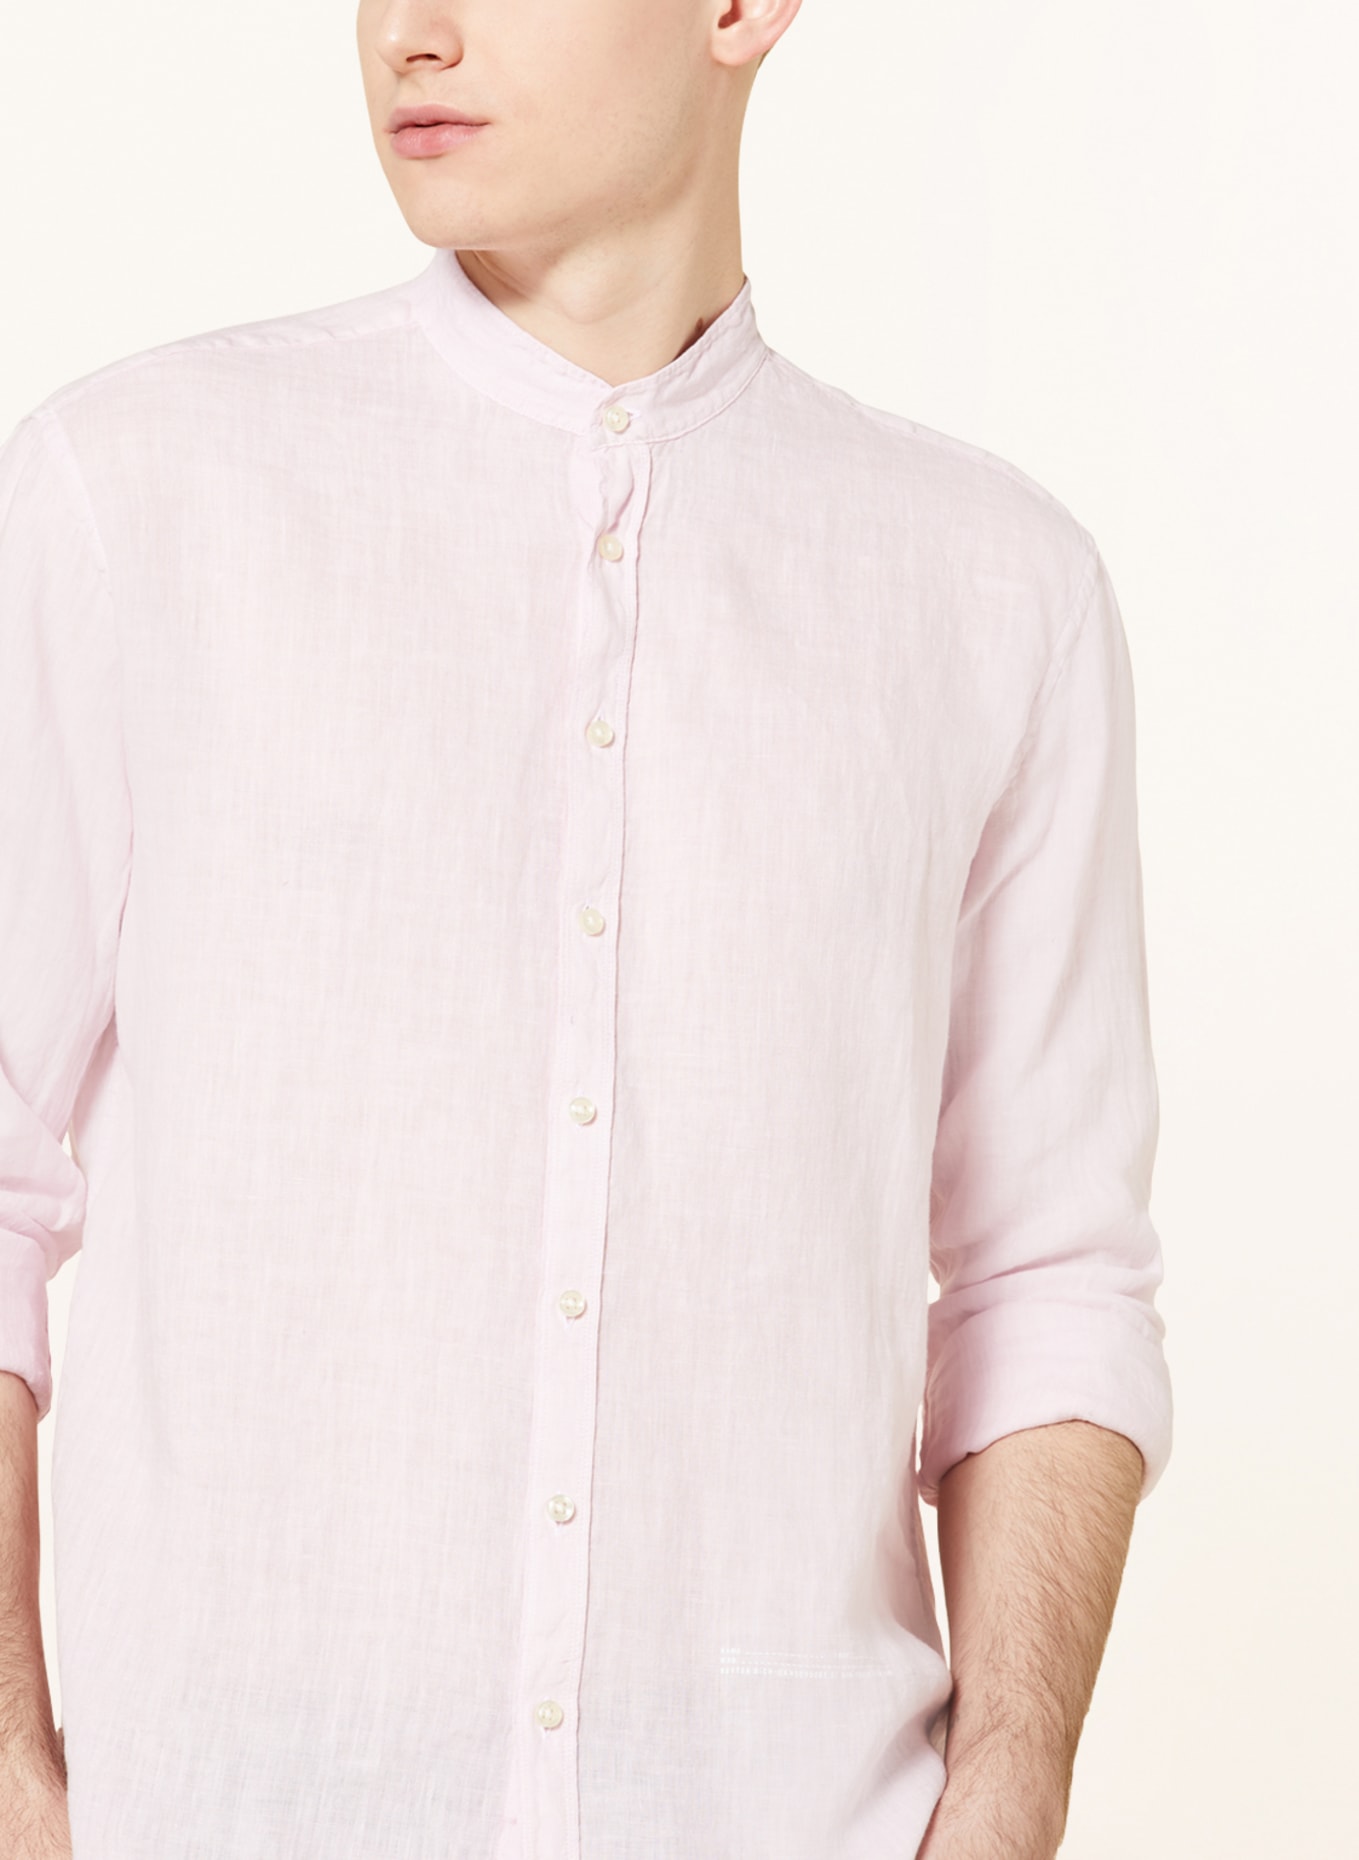 BETTER RICH Linen shirt regular fit with stand-up collar, Color: PINK (Image 4)